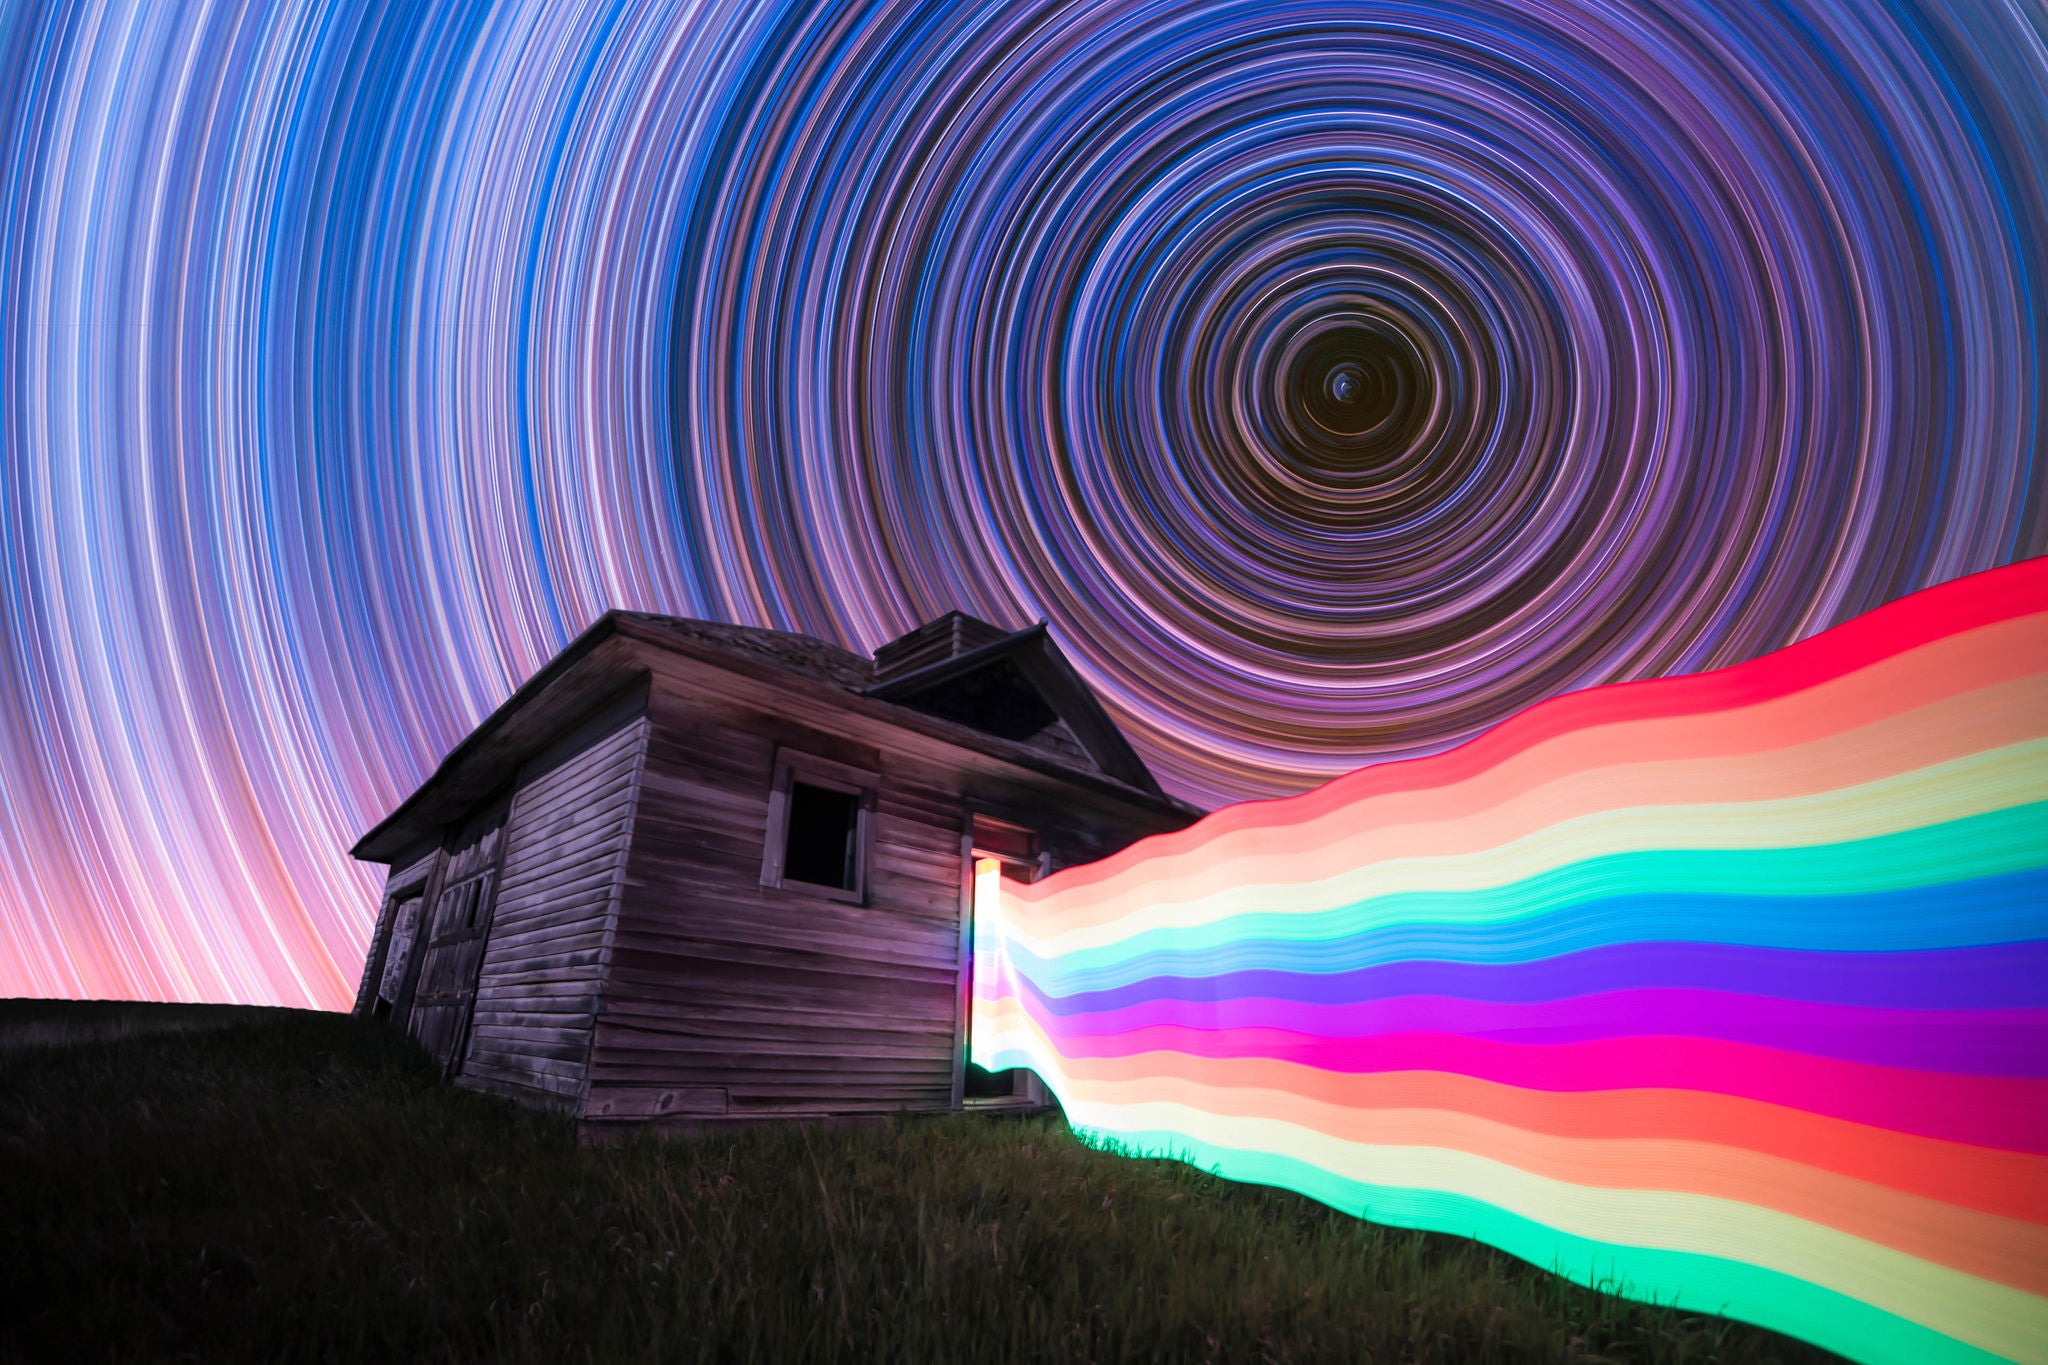 Long exposure, light painting night photography. Star trails and rainbow